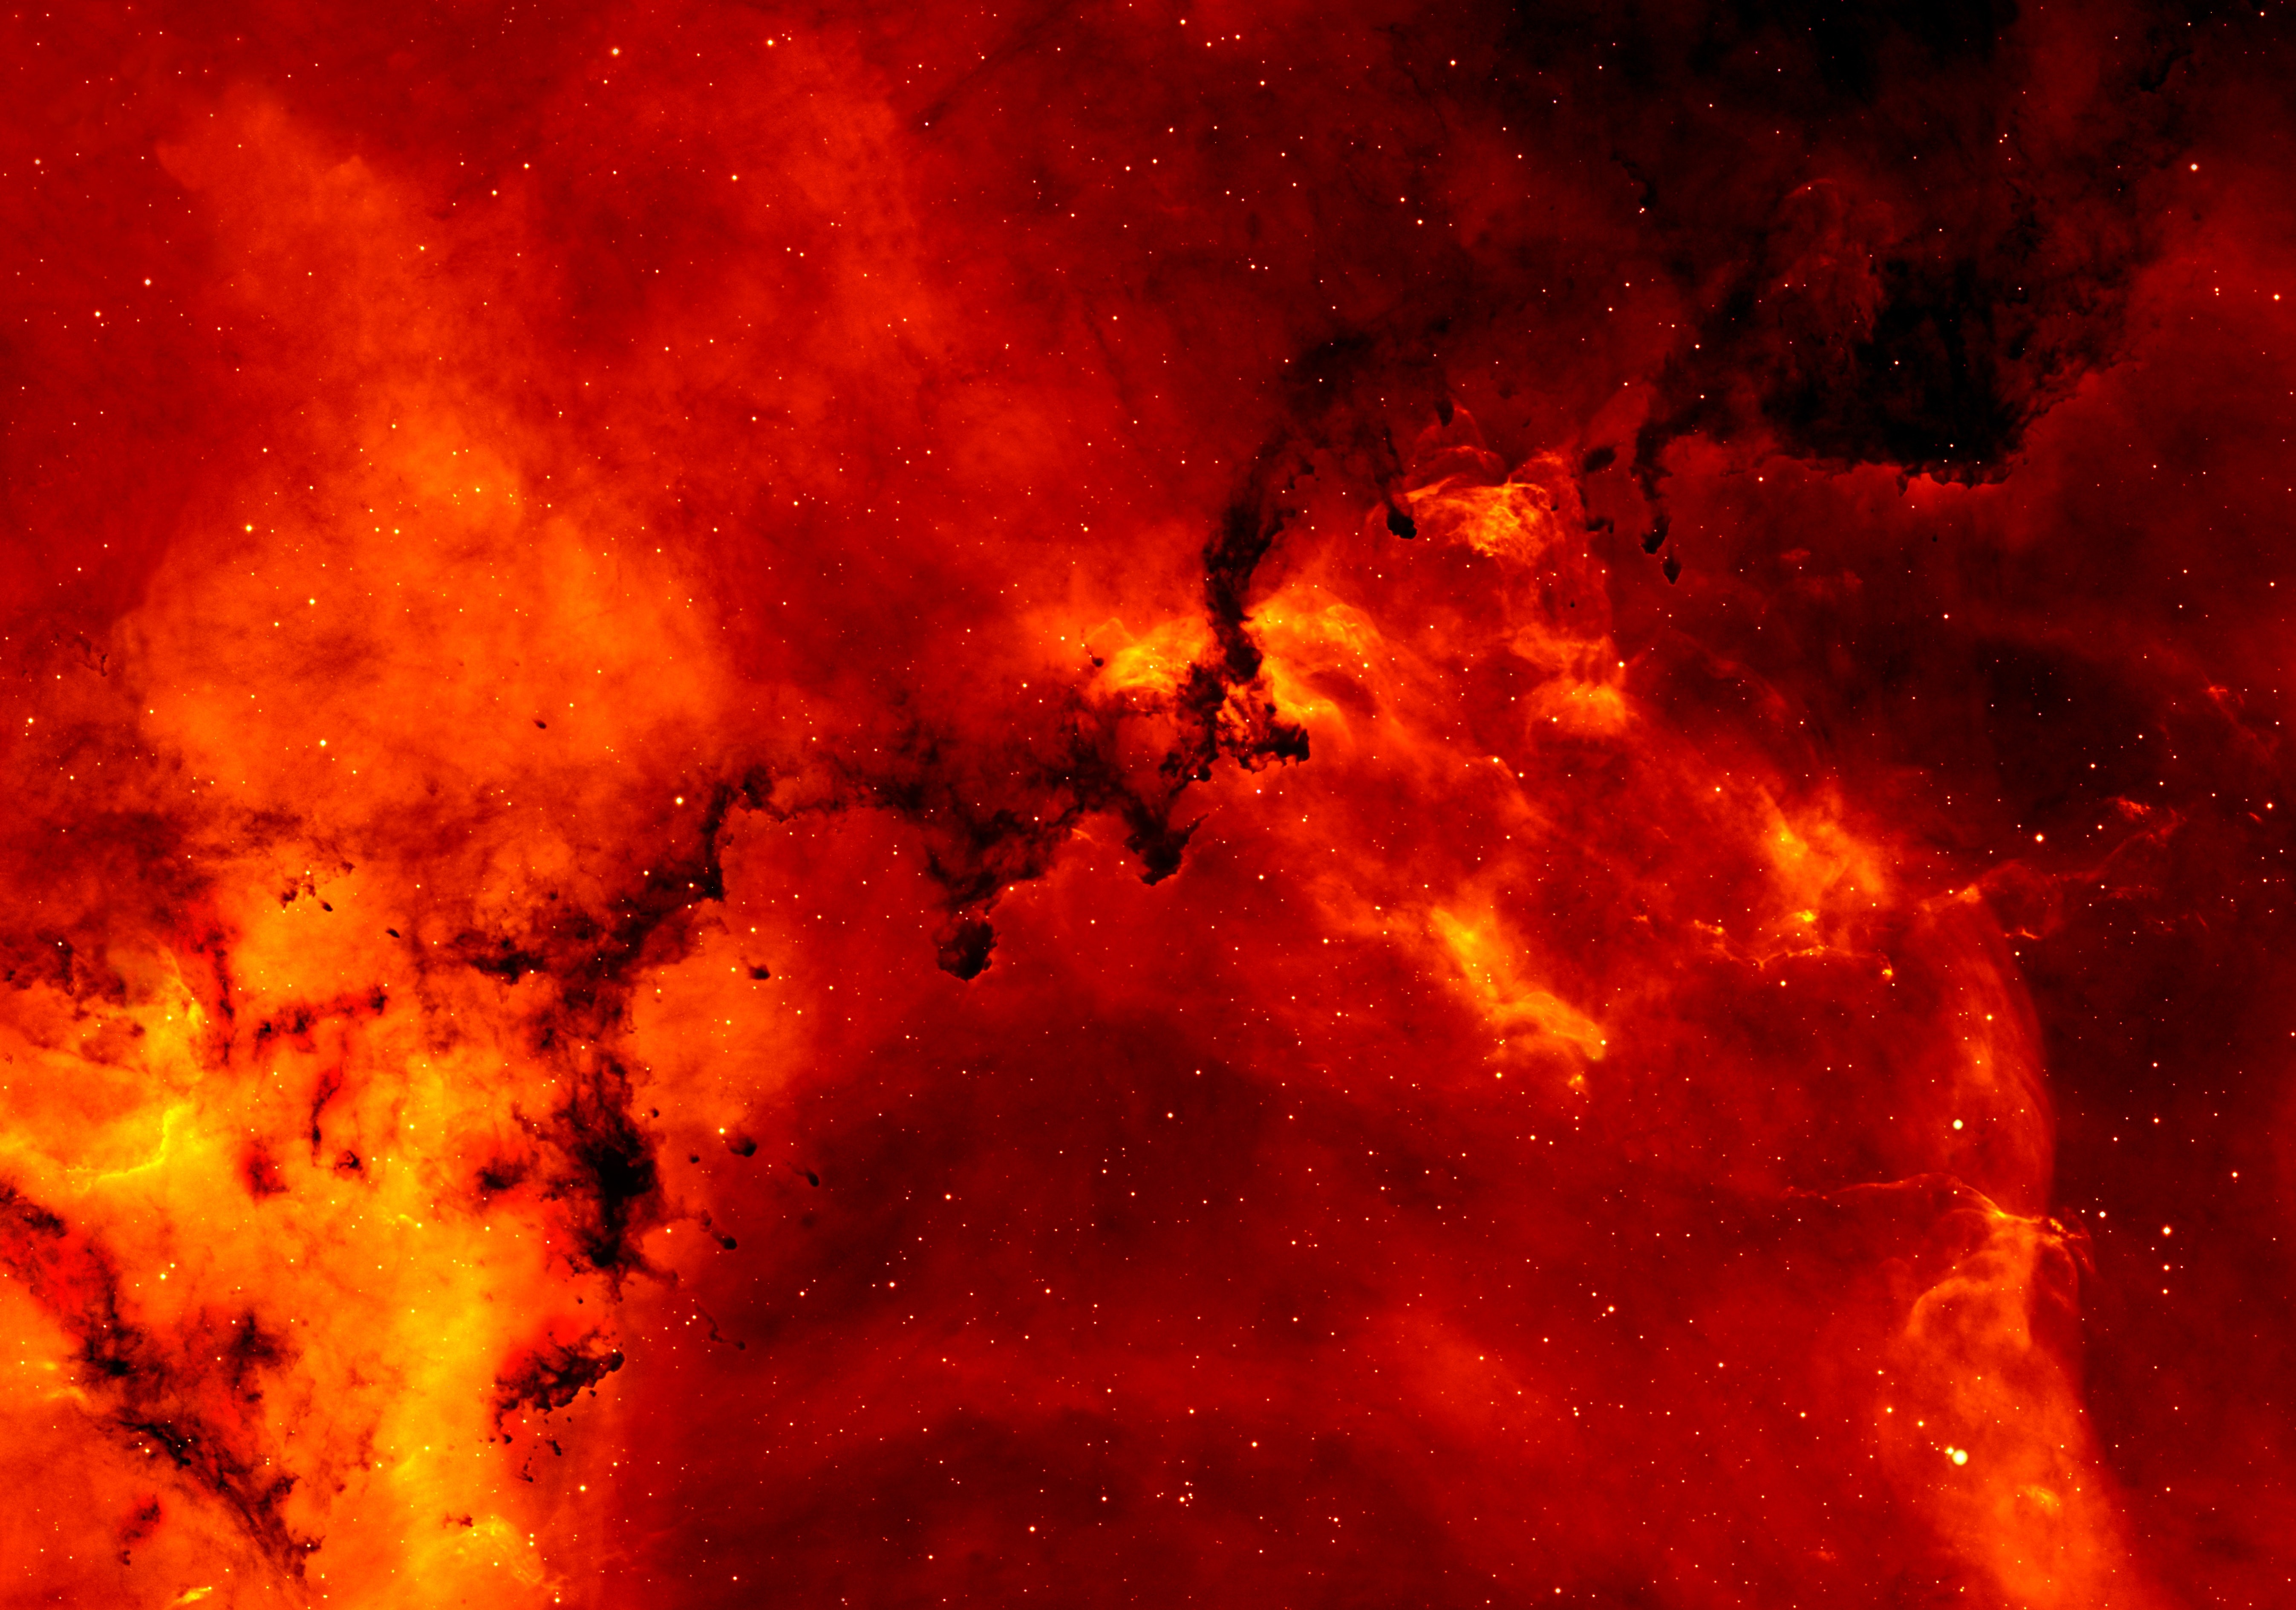 Solar flares Wallpaper 4K, Fire, Outer space, Blazing, Red background